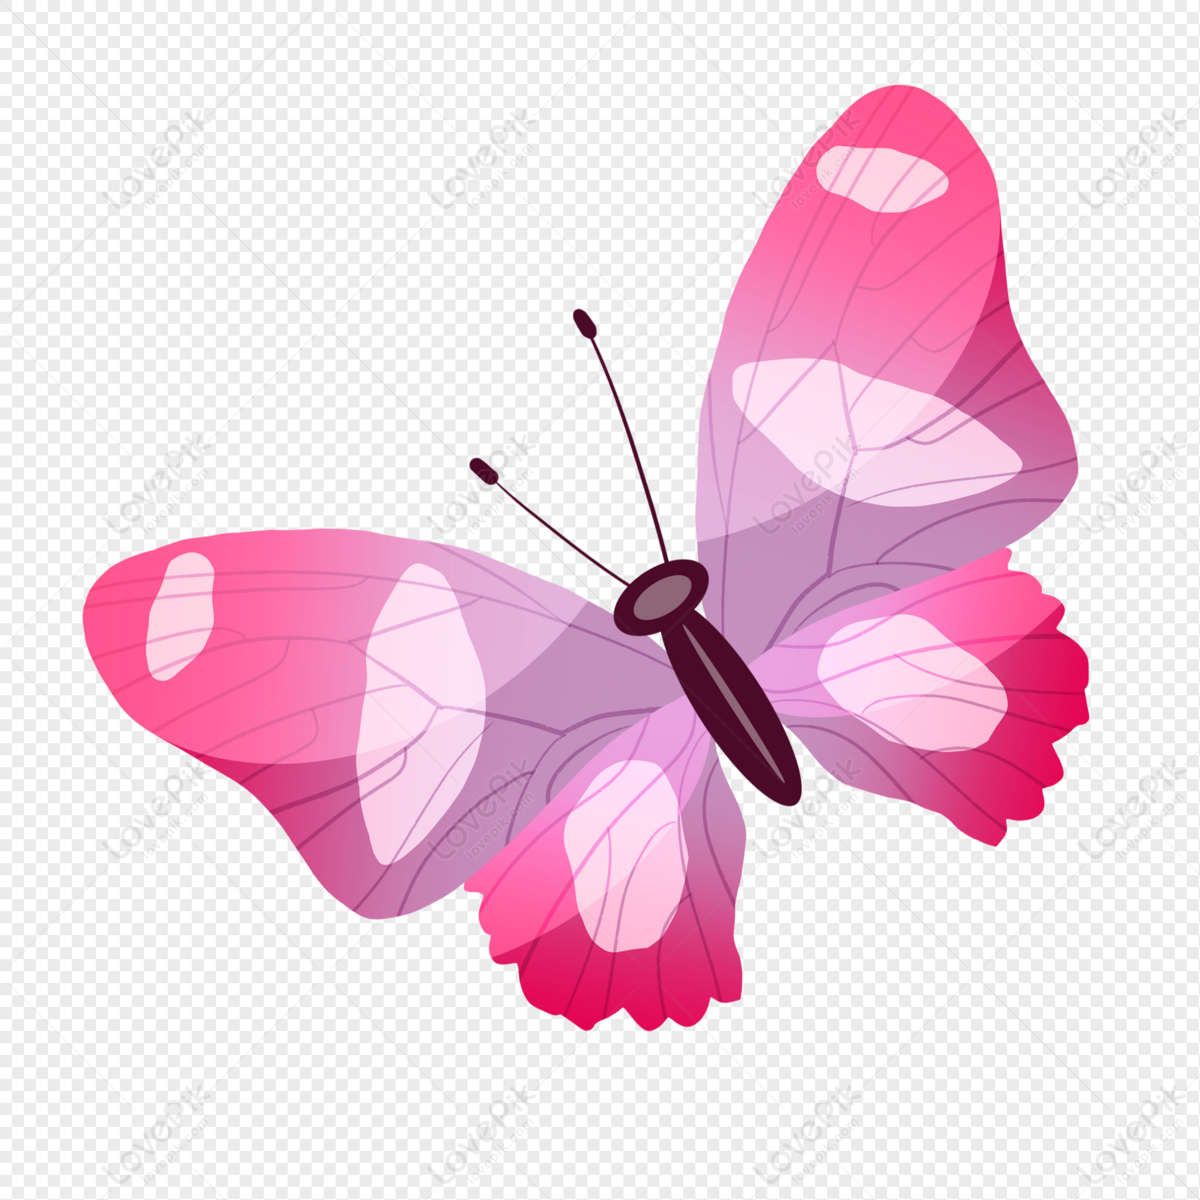 Pink Flower Butterfly PNG Transparent Background And Clipart Image For Free  Download - Lovepik | 401485650